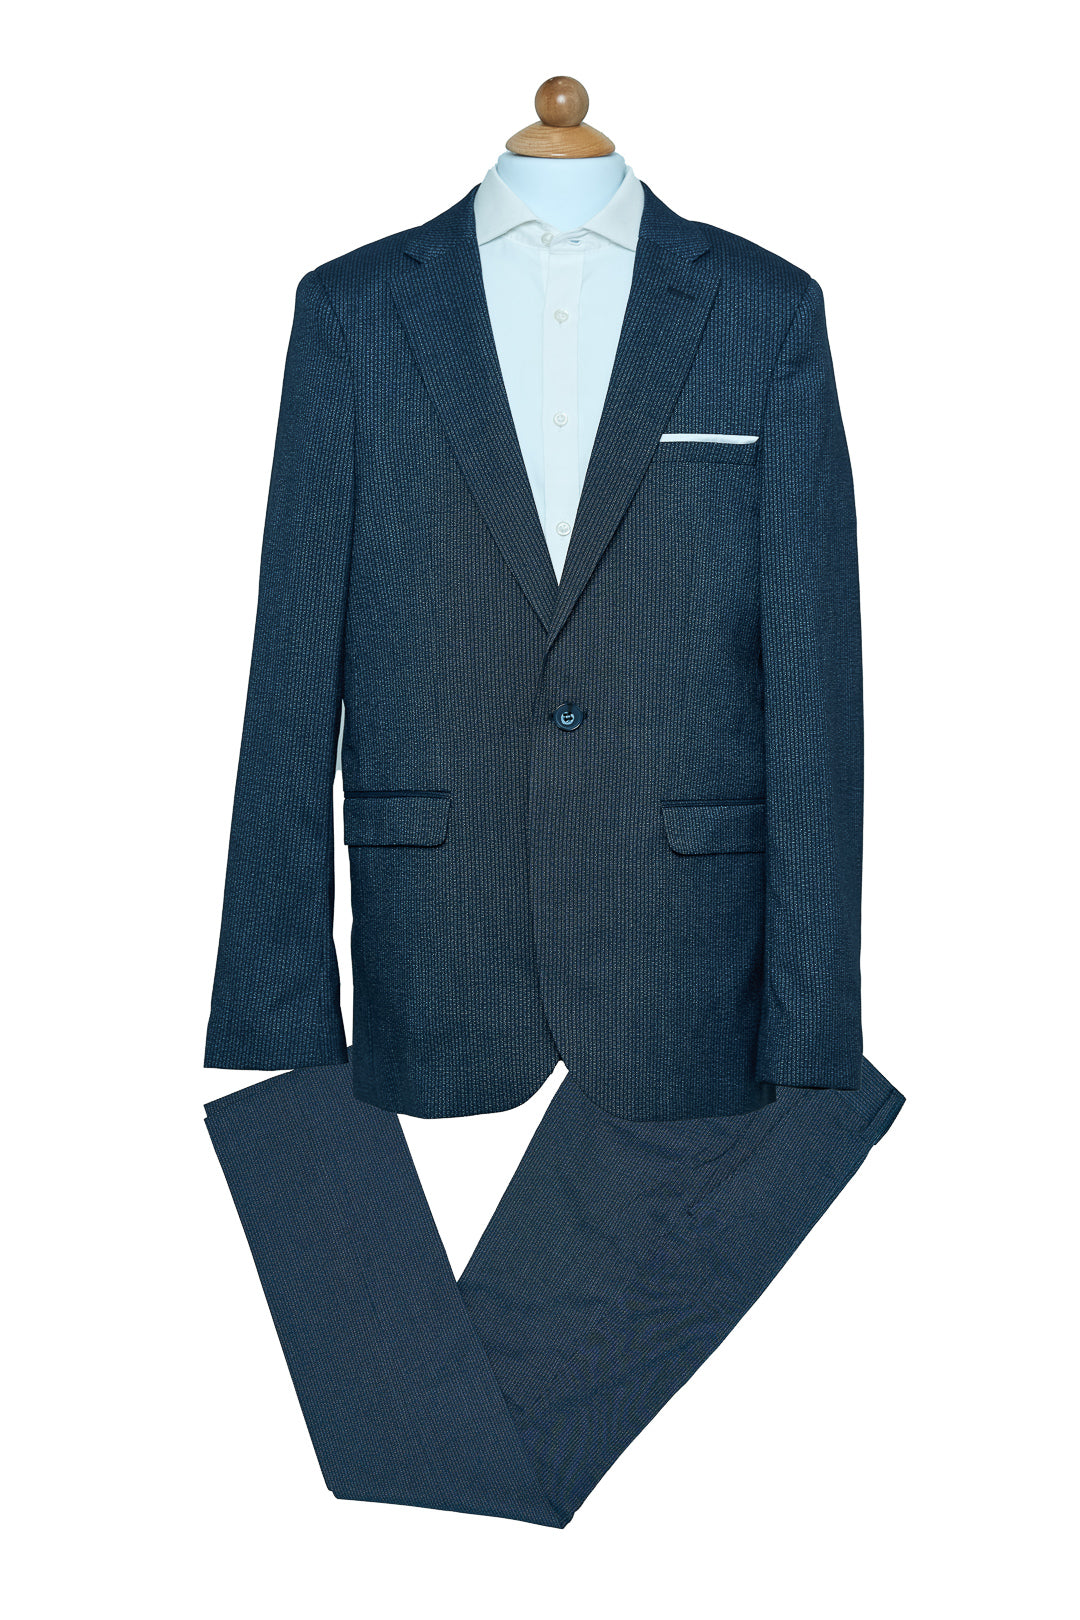 Striped Patterned Navy Suit